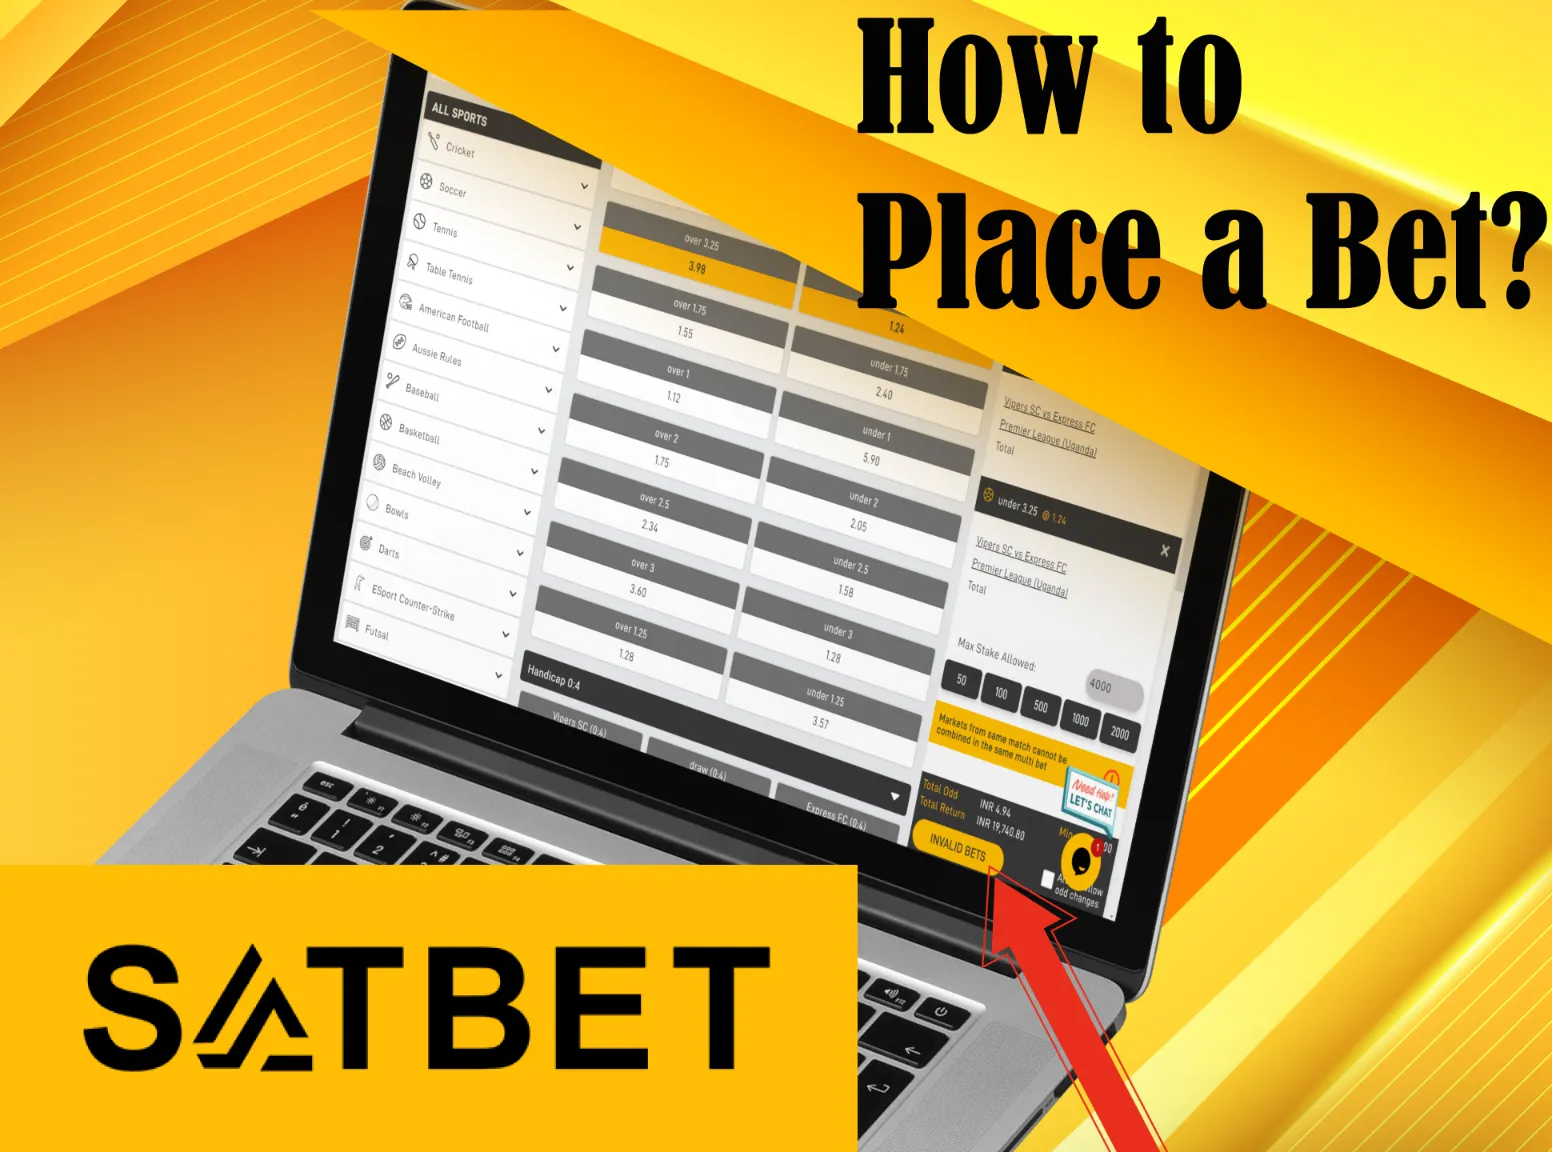 It's easy to place bets at Satbet.